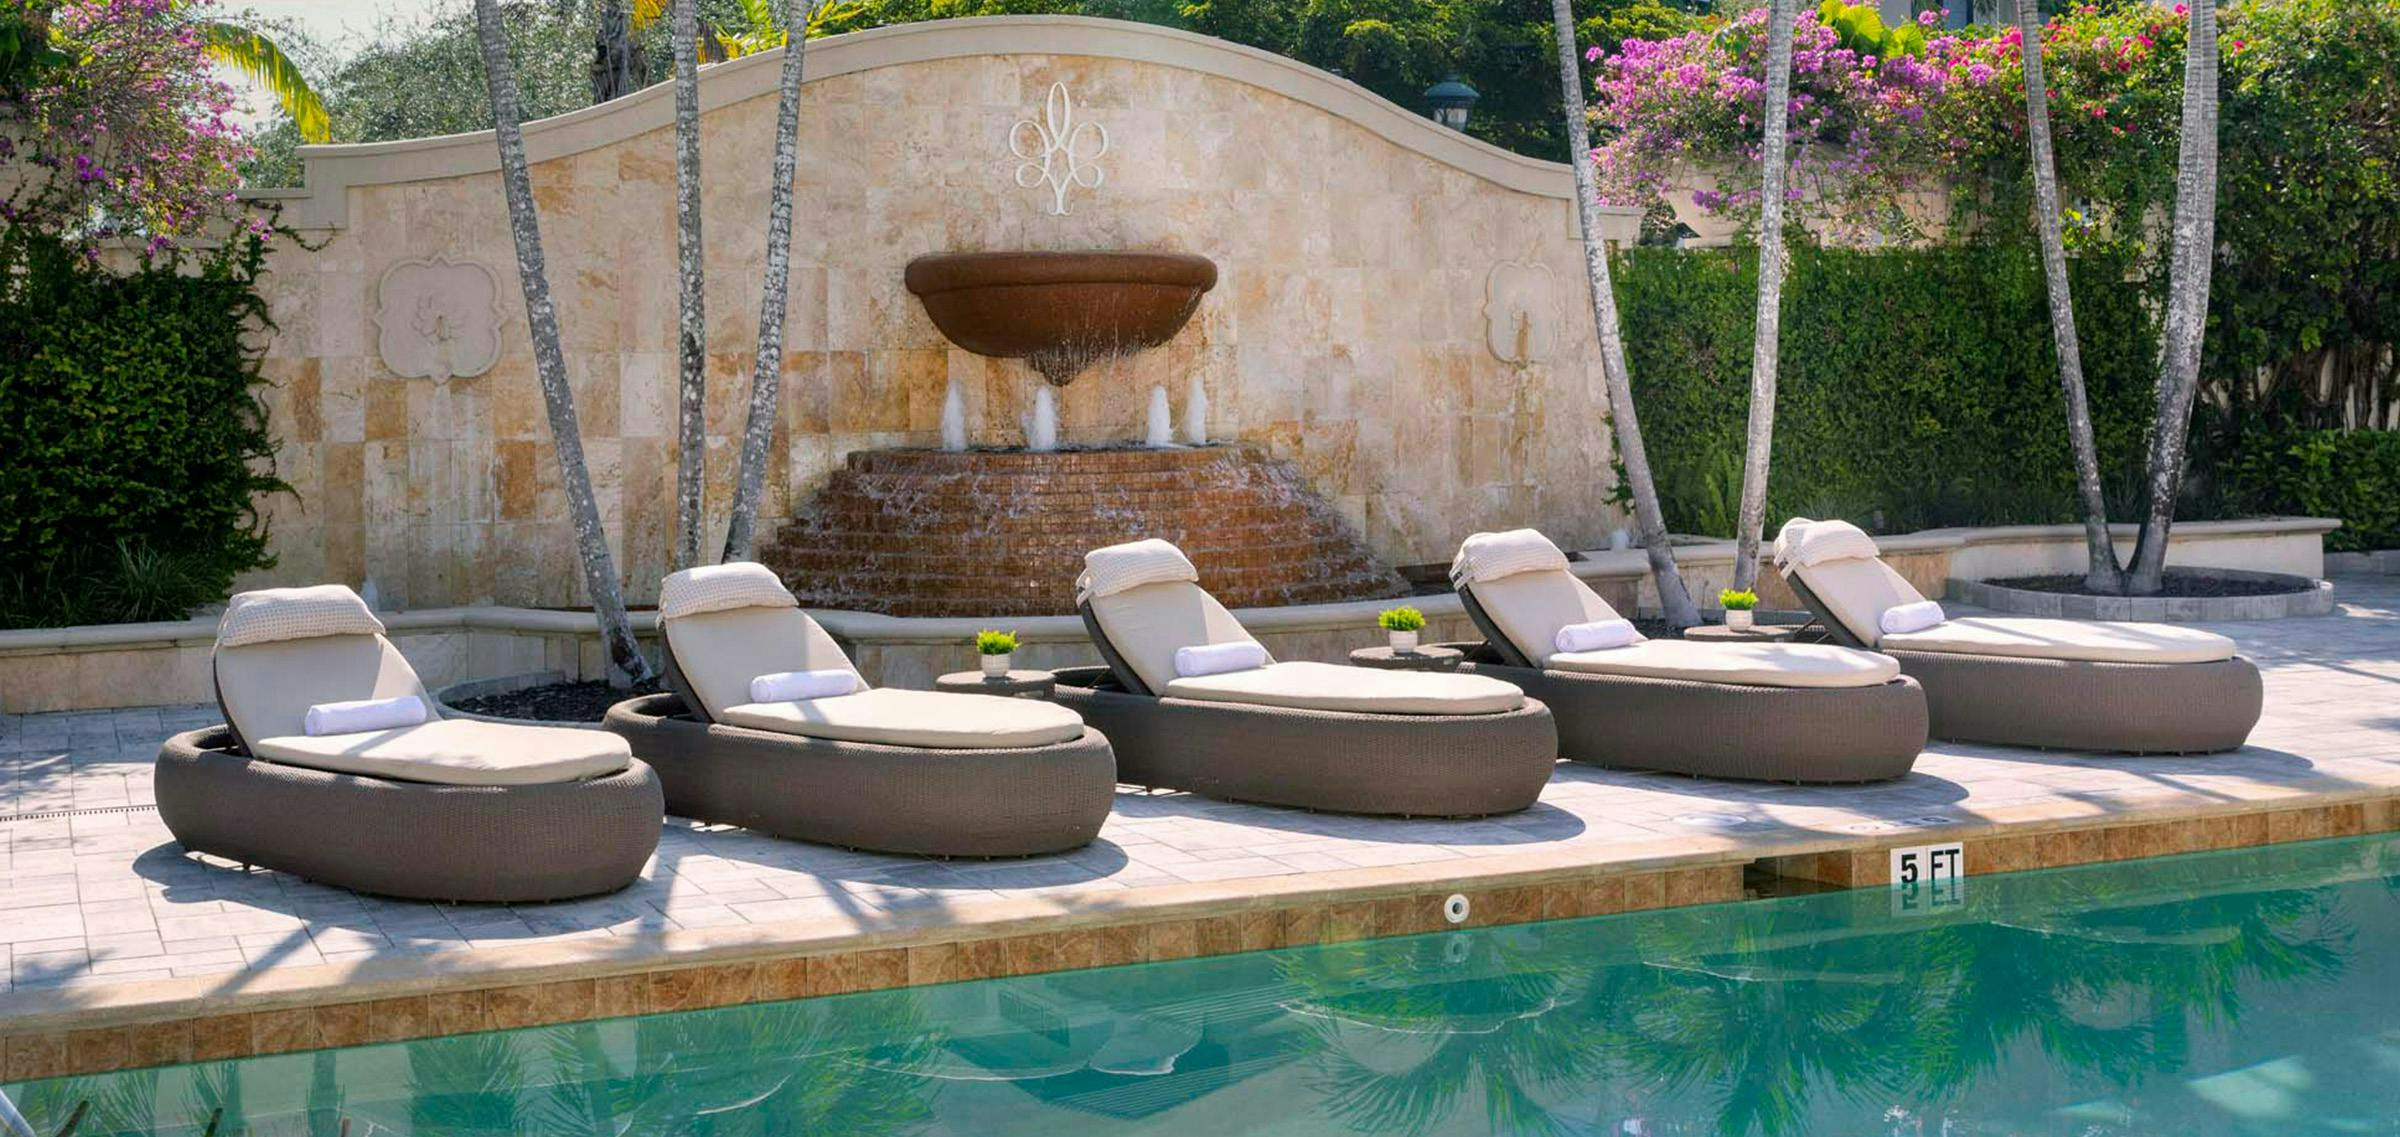 Texacraft Em Chaise Lounges by the Pool